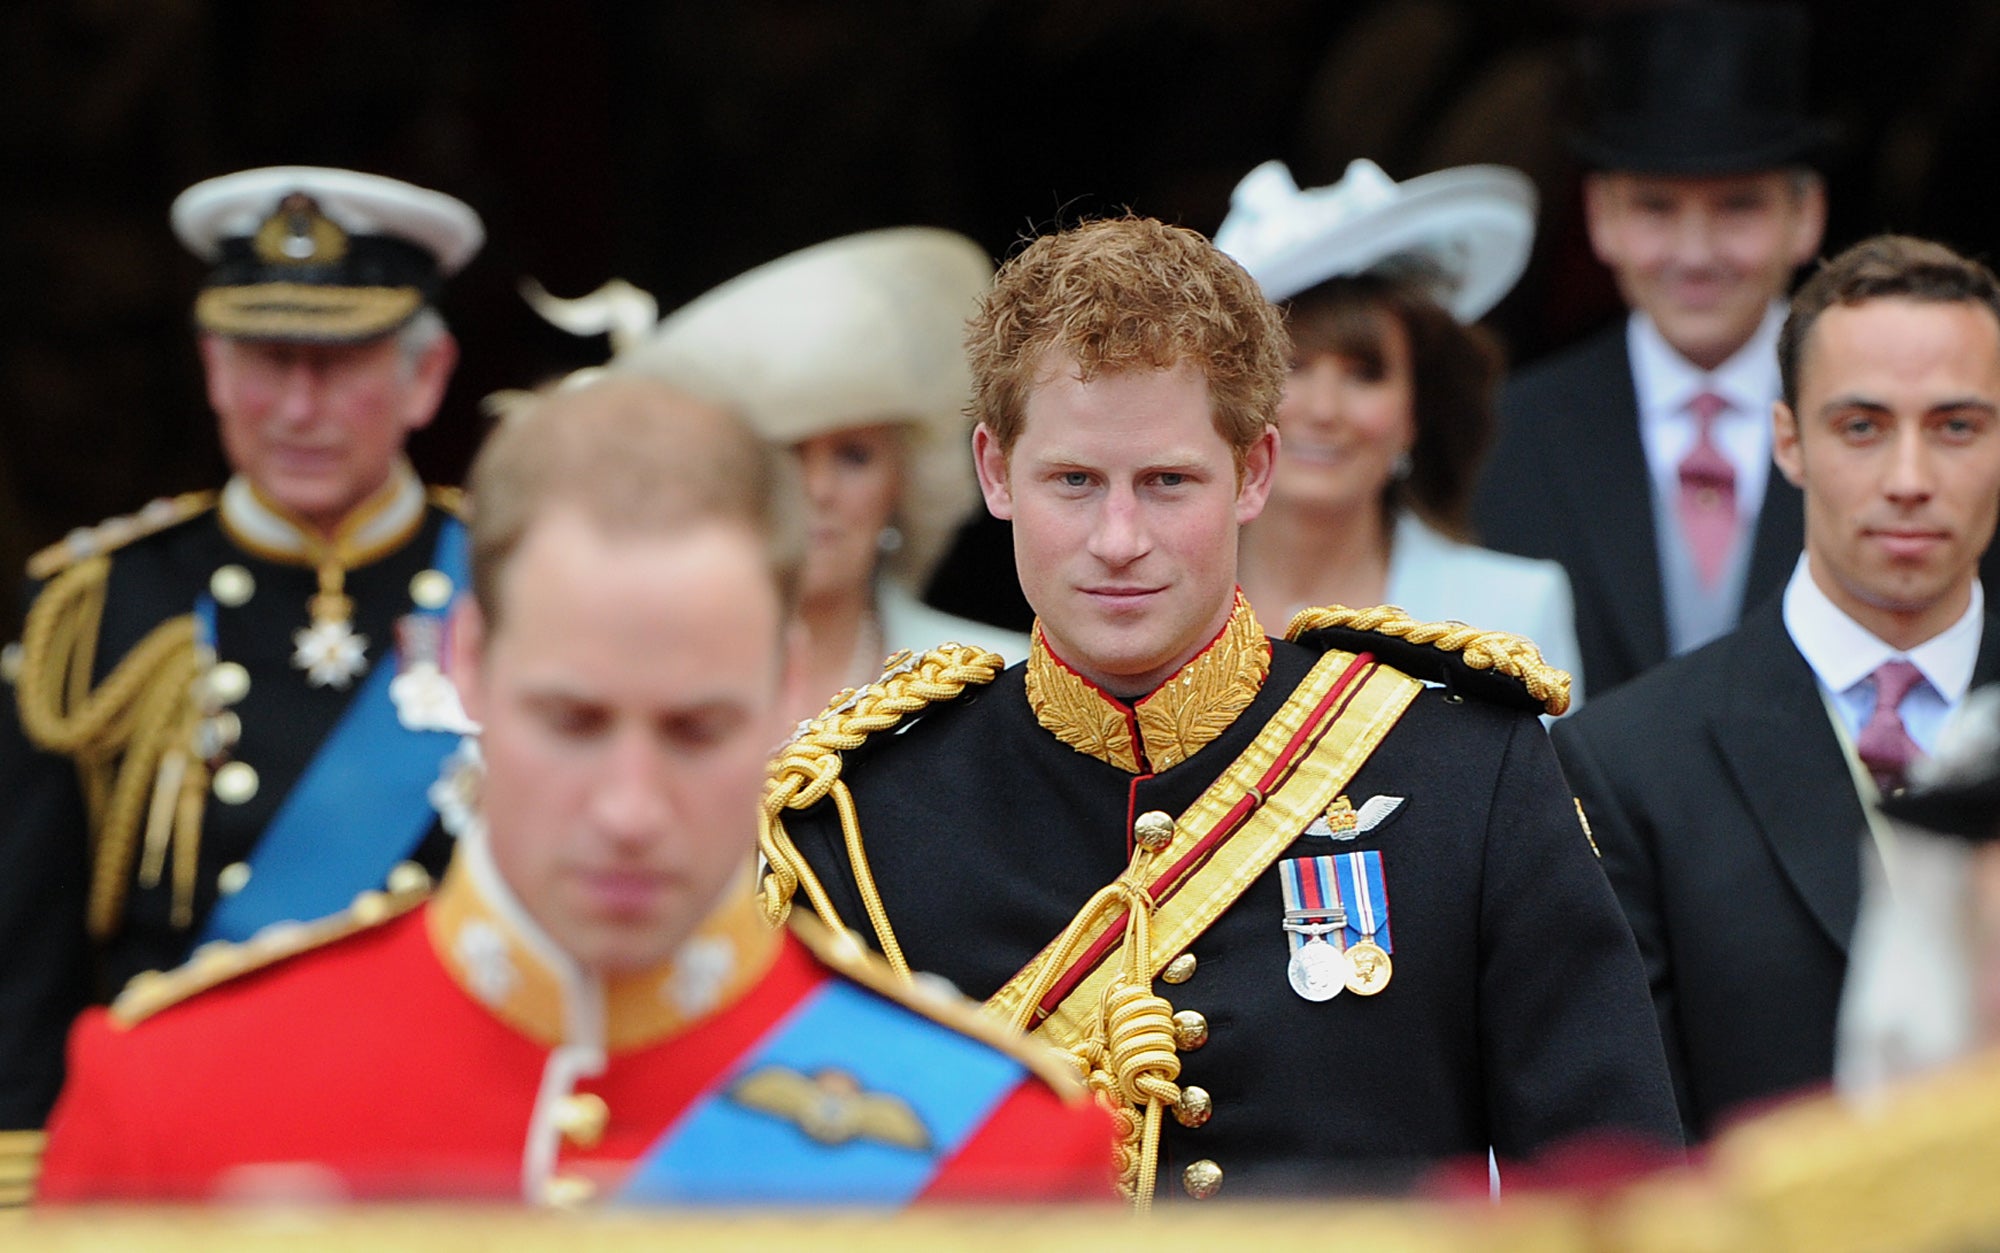 Prince Harry in military uniform at the wedding of the Prince of Wales and Kate Middleton in 2011